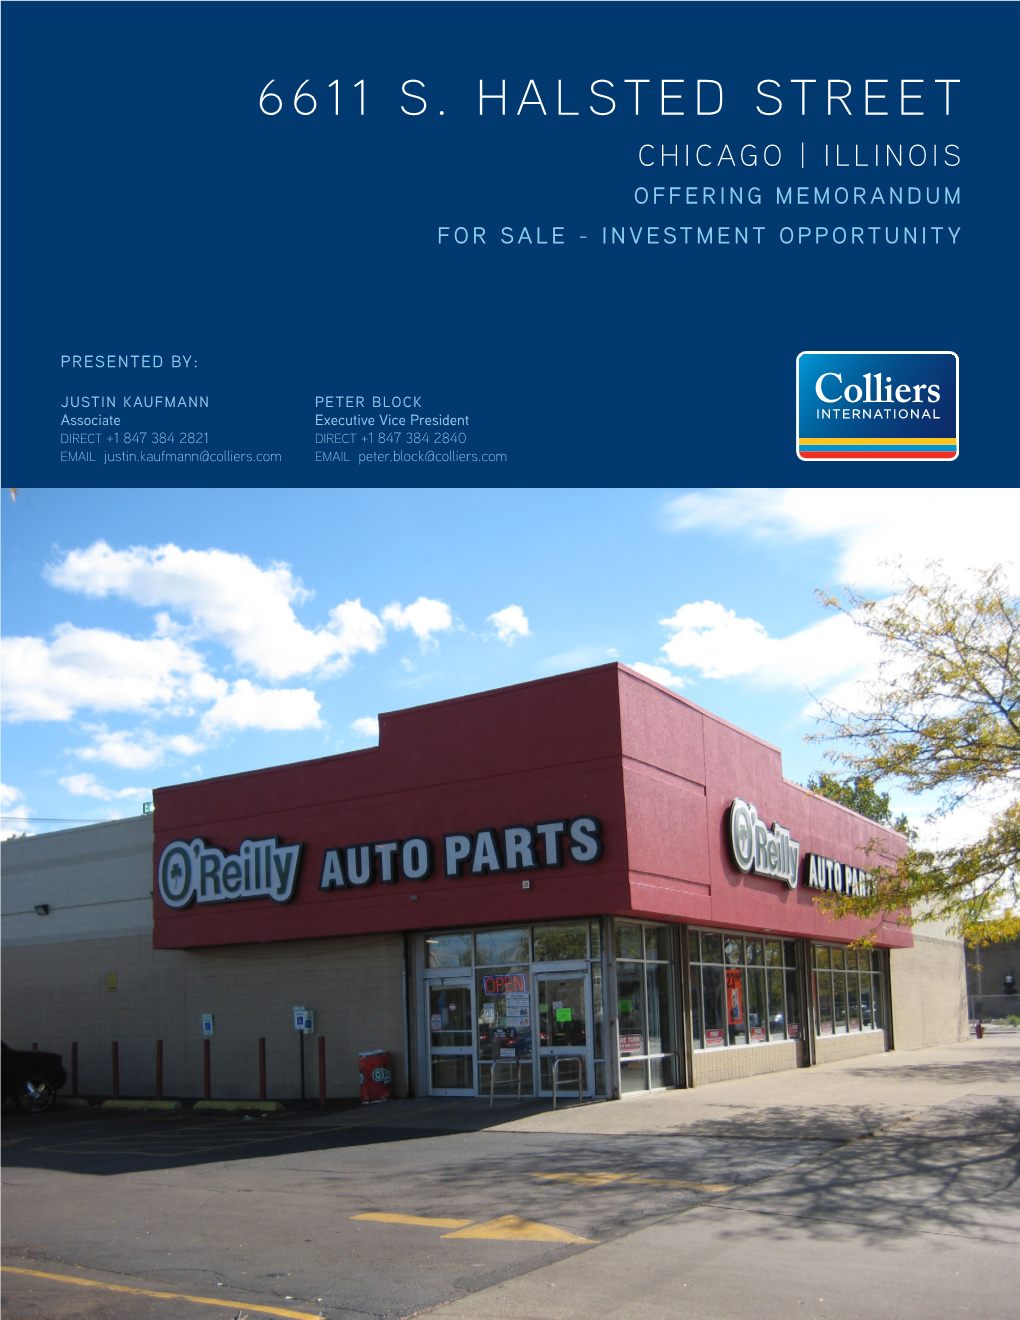 6611 S. Halsted Street Chicago | Illinois Offering Memorandum for Sale - Investment Opportunity